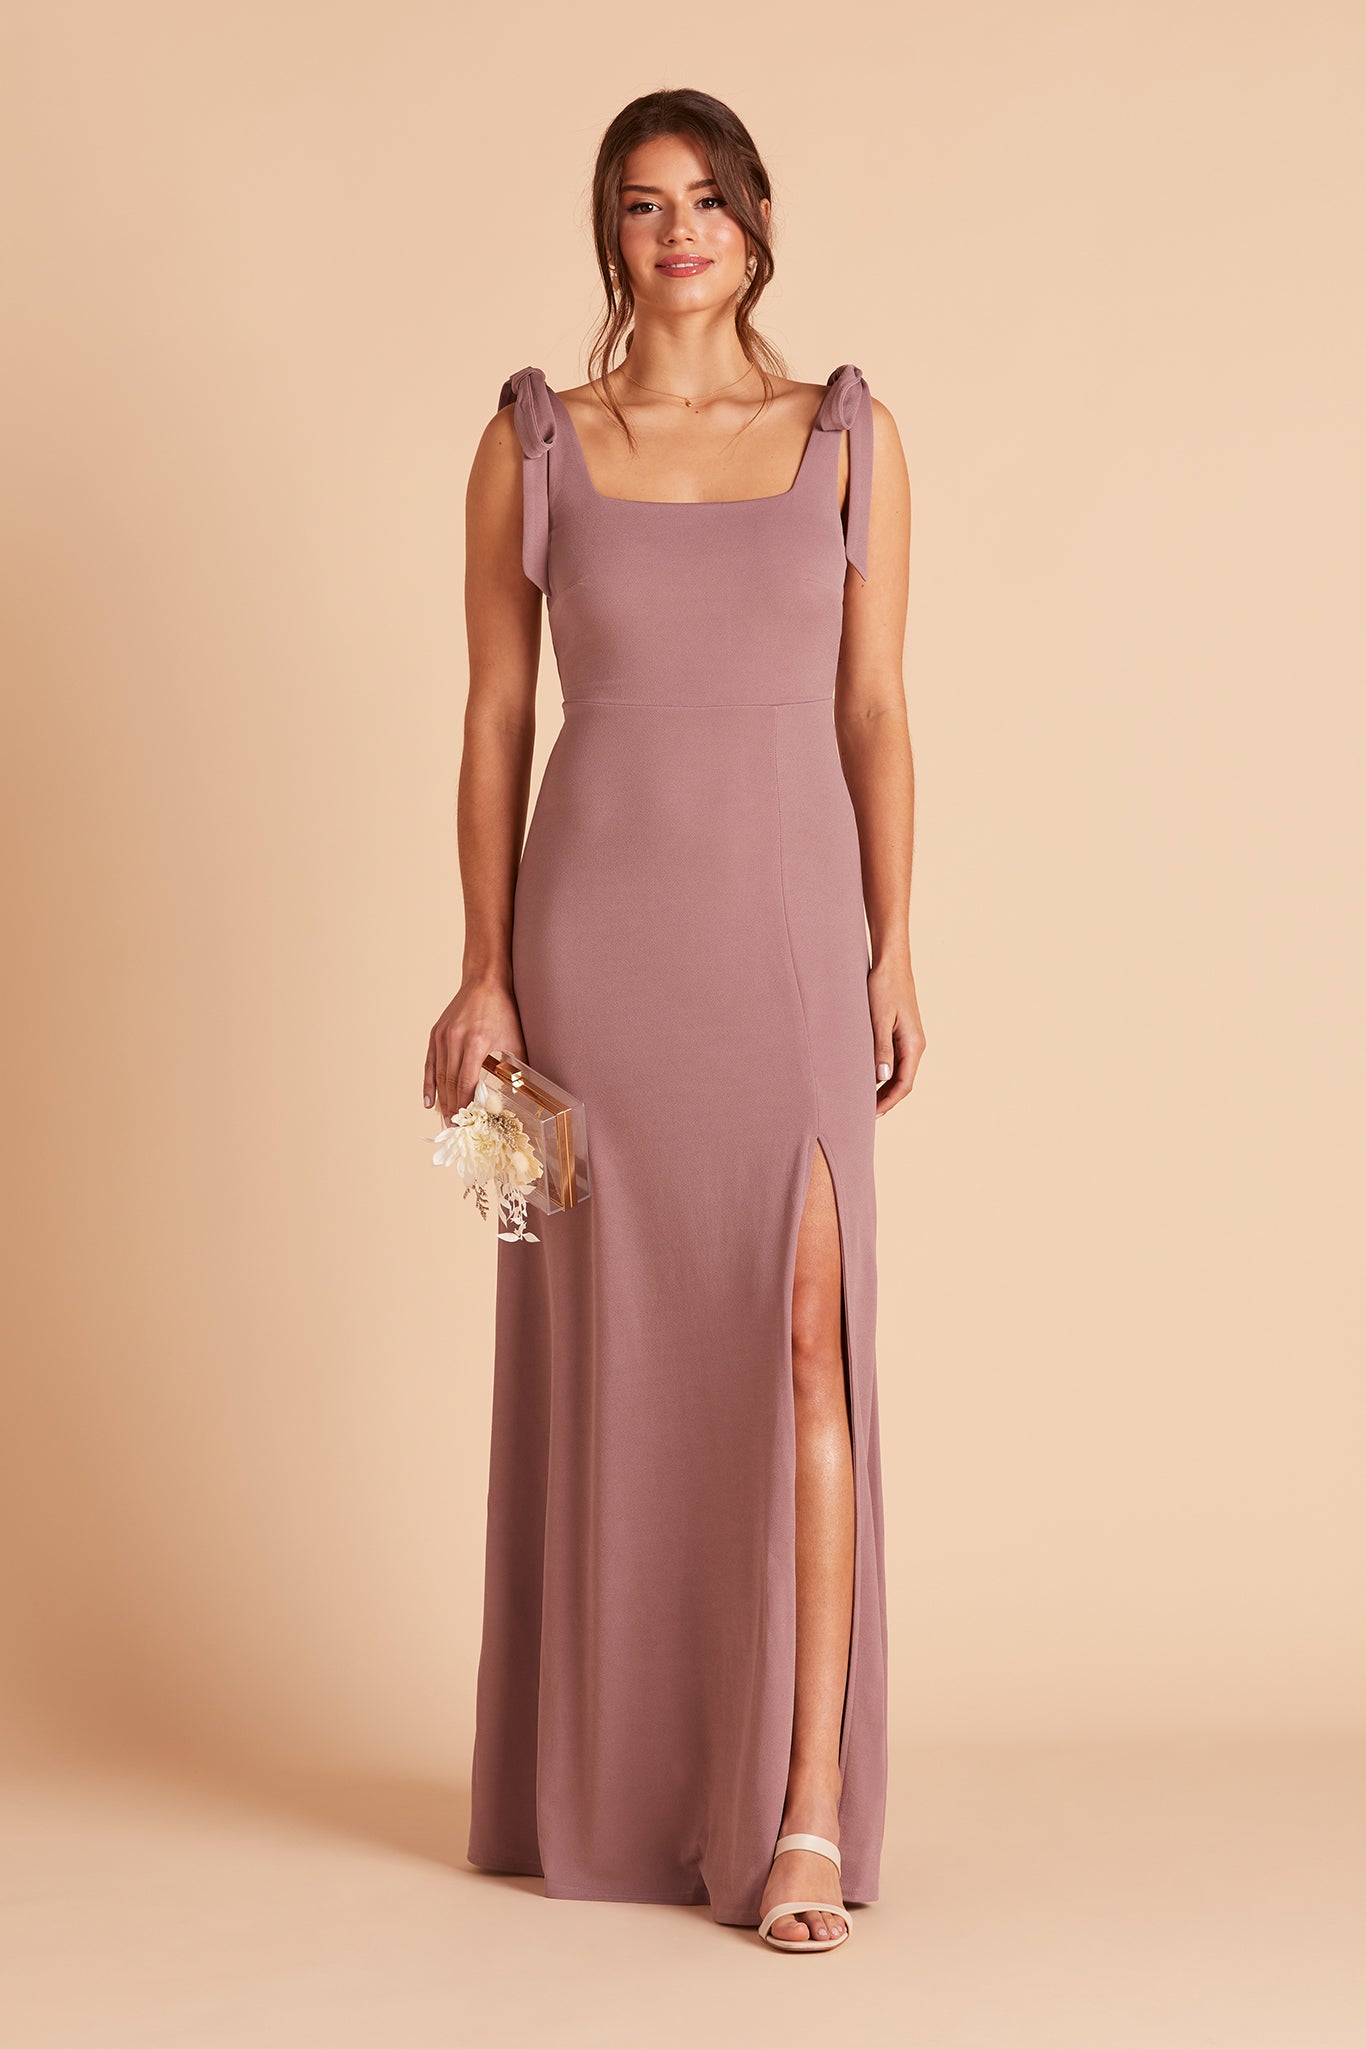 Alex convertible bridesmaid dress with slit in dark mauve crepe by Birdy Grey, front view